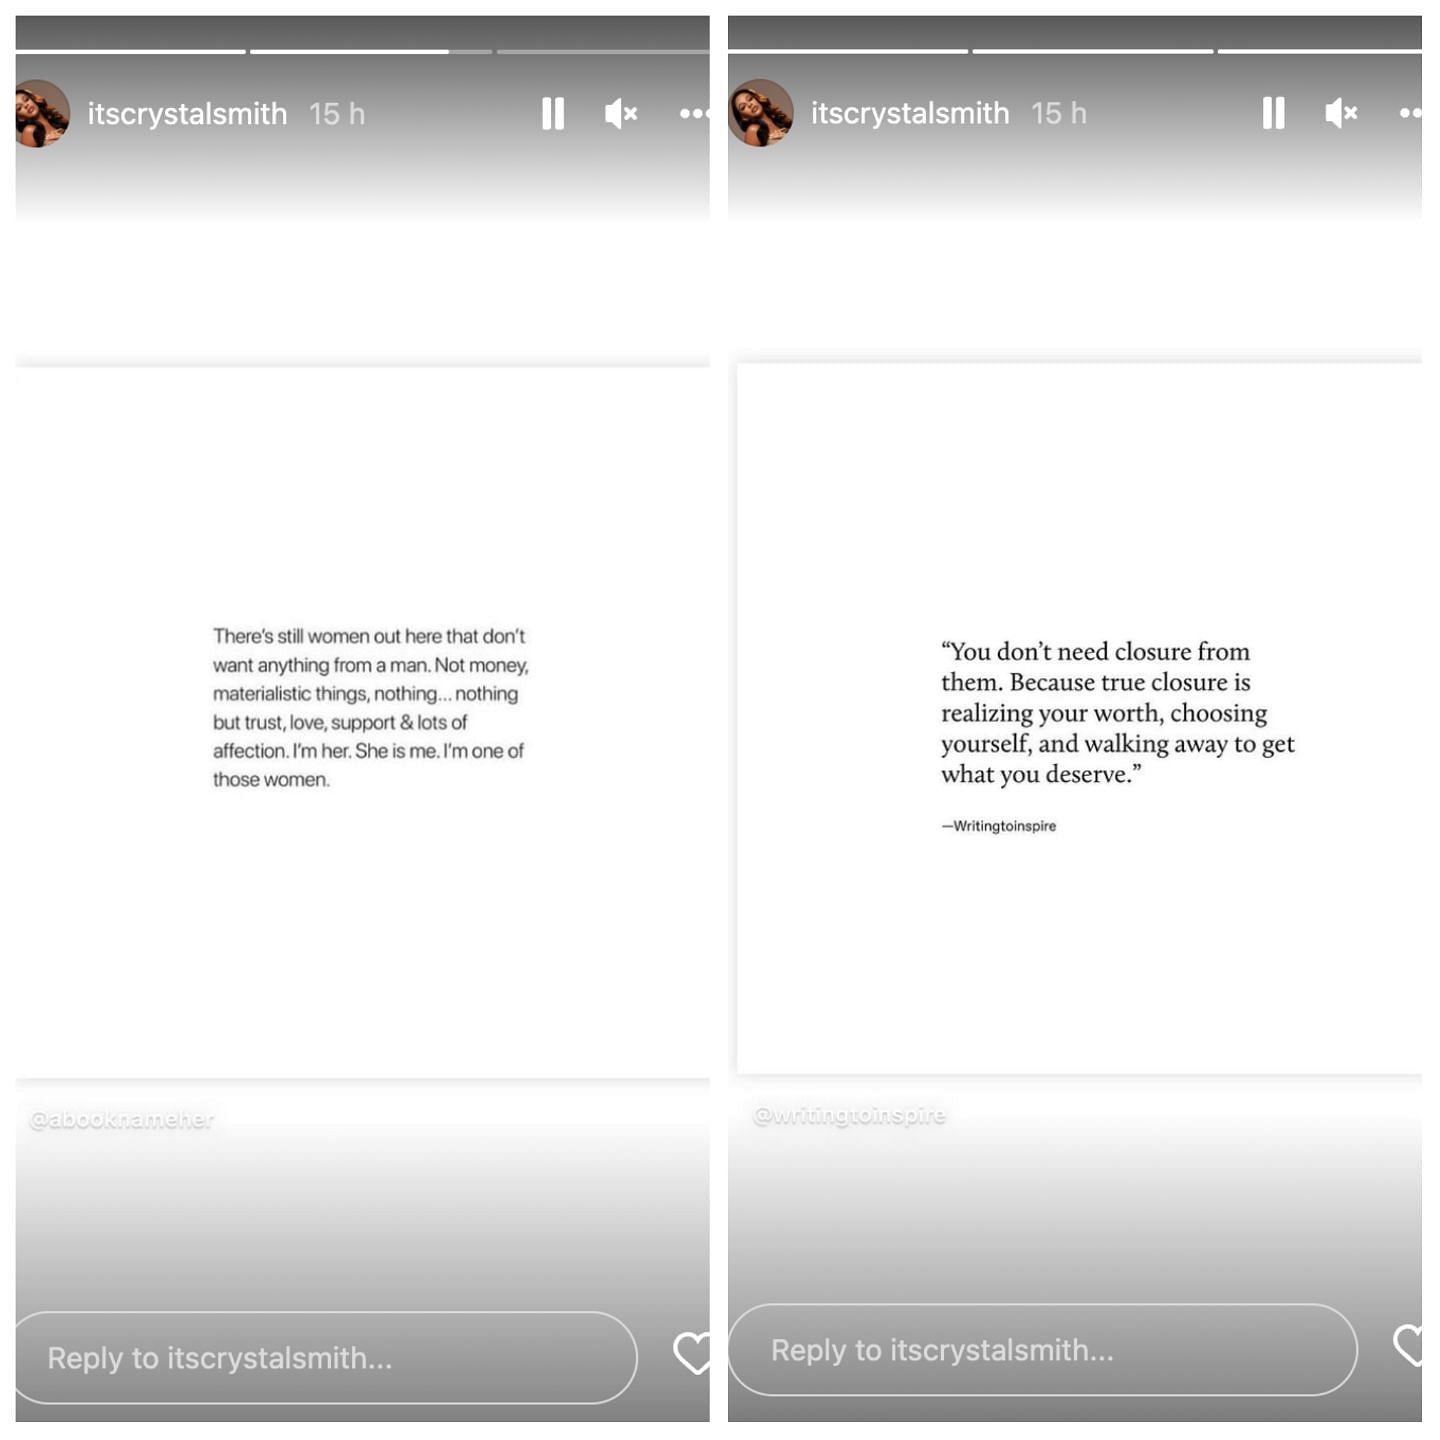 Crystal shares some encrypted quotes on Instagram soon after announcing split with husband. (Image via @itscrystalsmith/ Instagram)